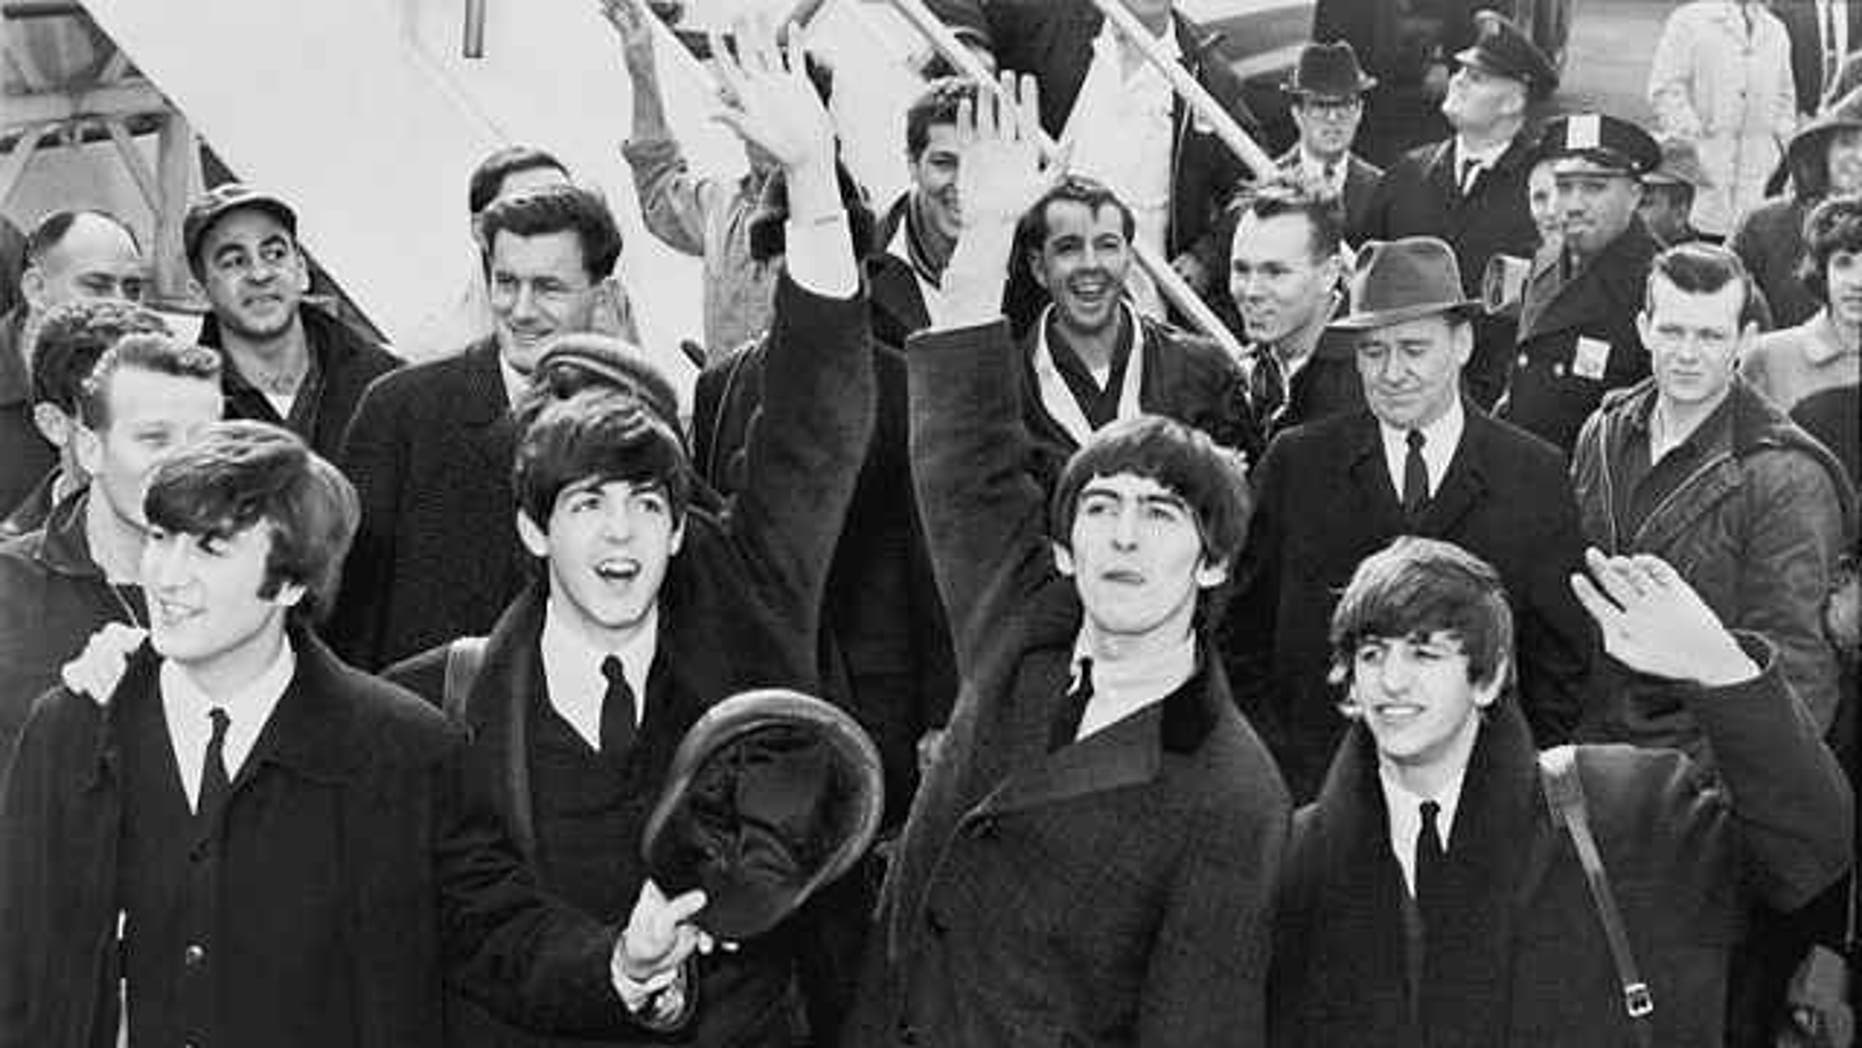 Documentary explores The Beatles’ final performance and demise